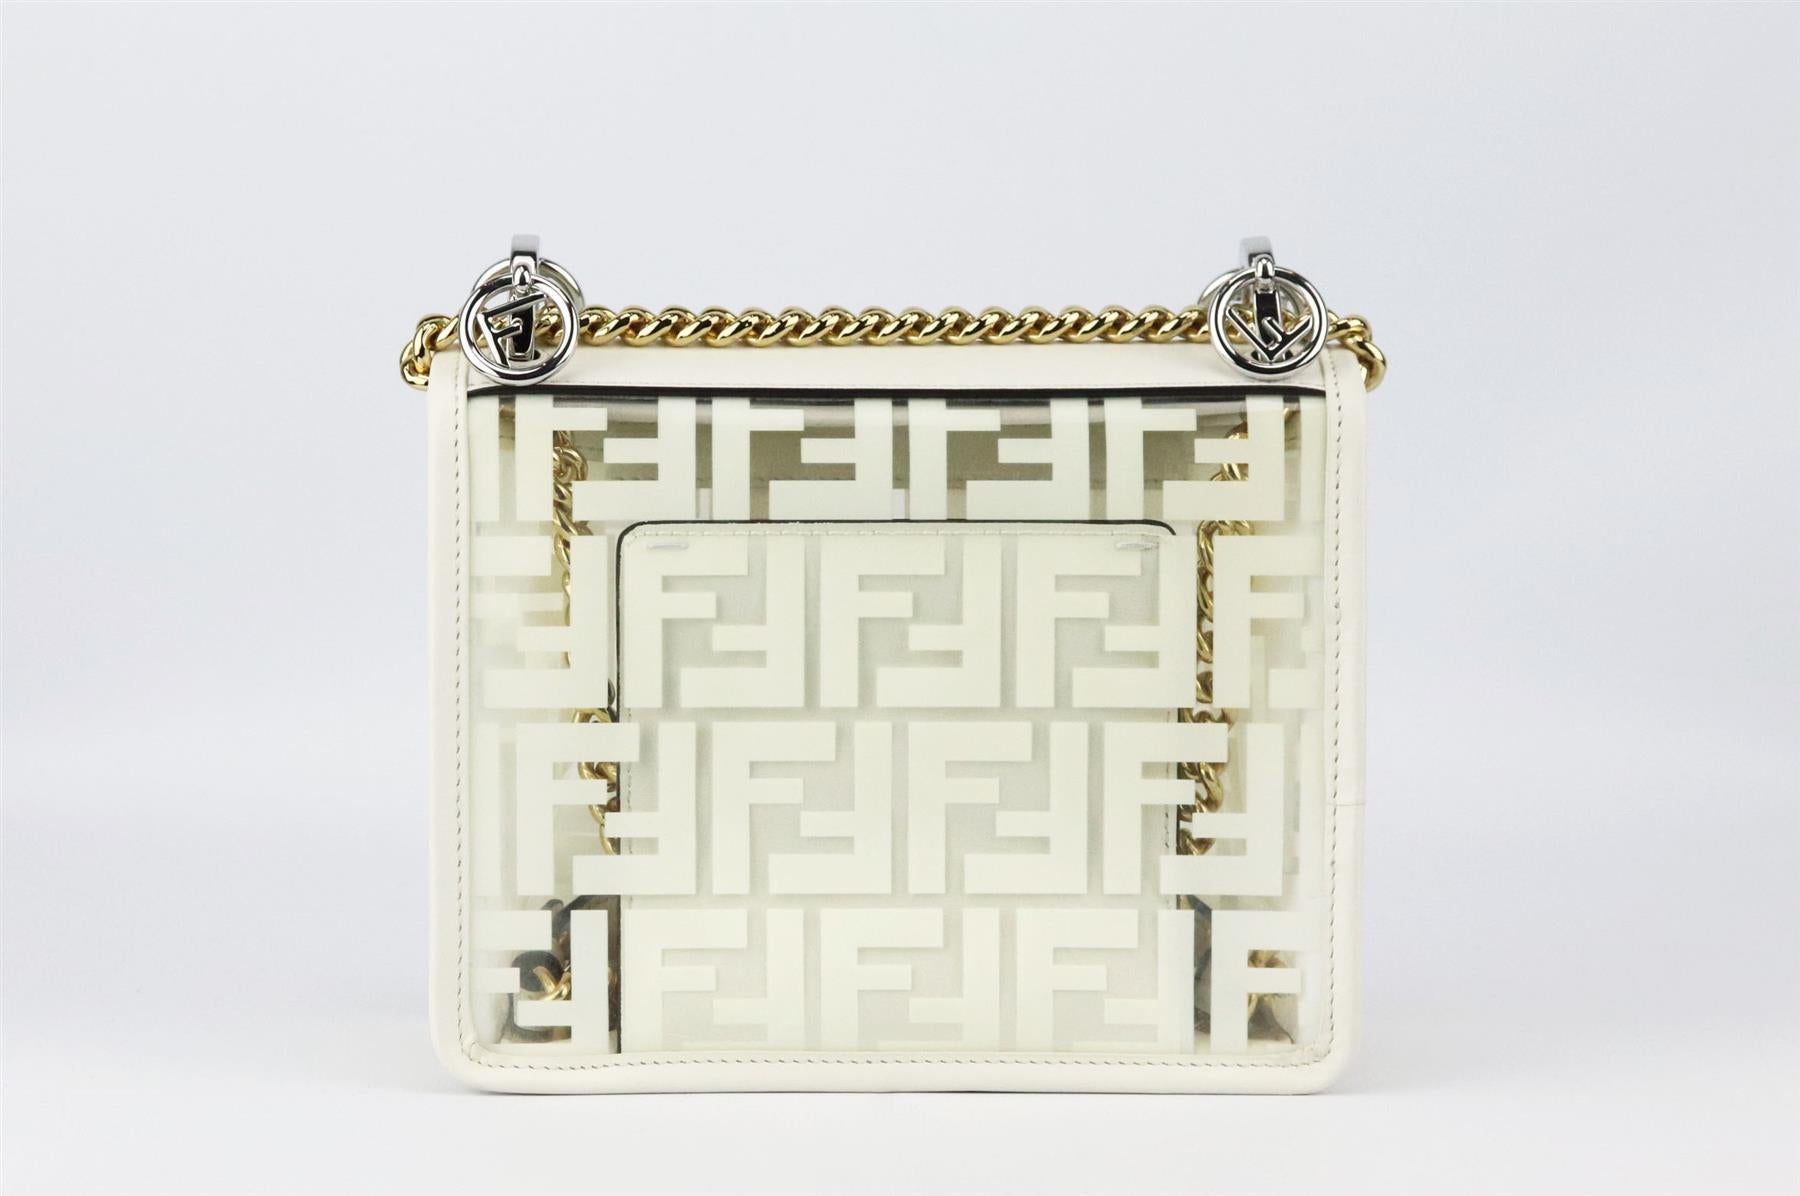 This small 'Kan I' bag by Fendi is made from smooth Italian leather and printed FF PVC and punctuated with glossy silver and gold hardware with chain shoulder strap, it opens to a spacious matching PVC interior with plenty of room for your daily